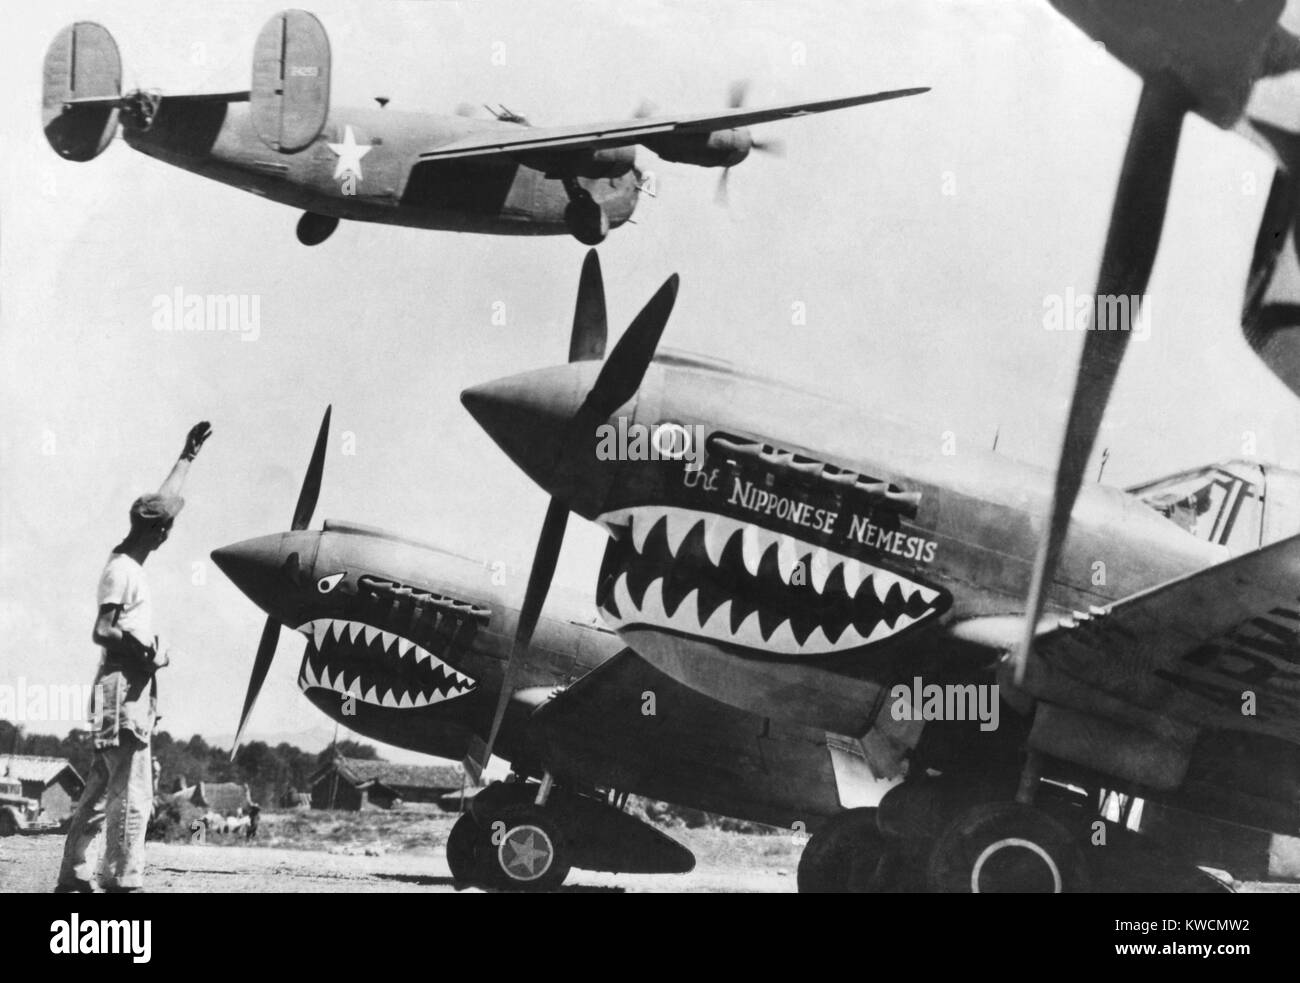 An American B-24 Liberator bomber takes off from an advanced U.S. base in China. On the ground are shark nosed P-40 fighters of the Flying Tigers, U.S. volunteers recruited under presidential authority and commanded by Claire Lee Chennault from Dec. 20, 1941 through July 4, 1942. - (BSLOC 2014 14 12) Stock Photo